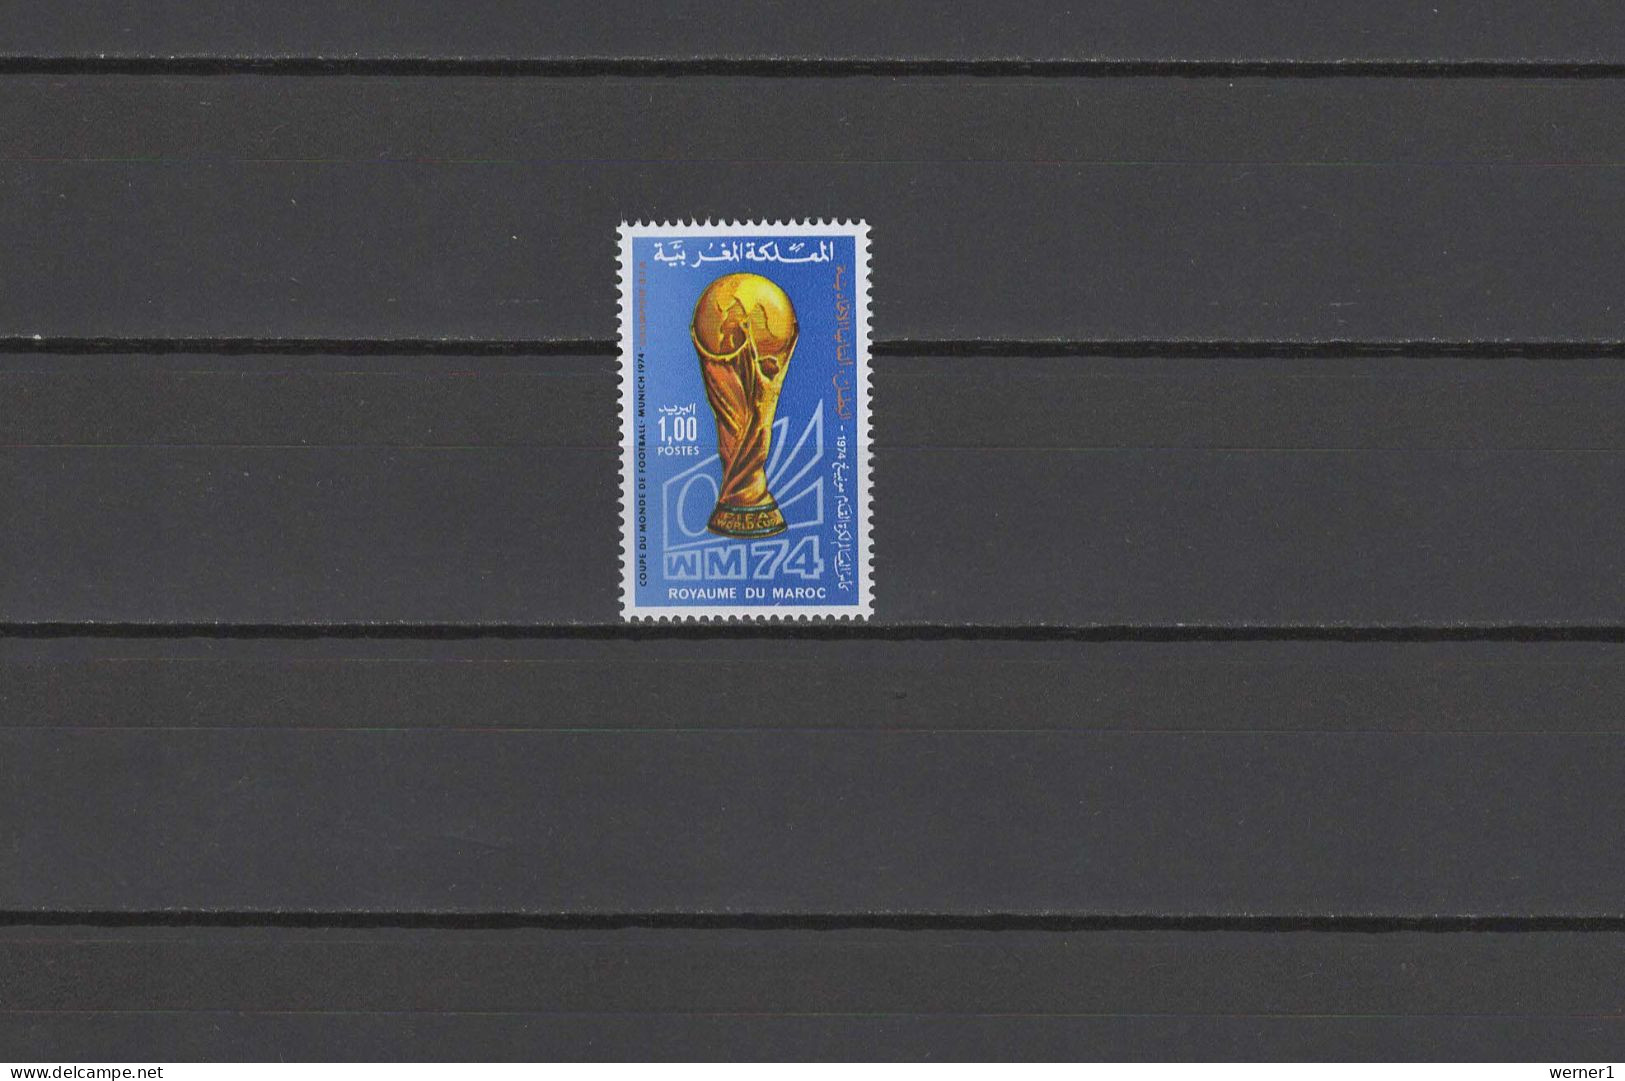 Morocco 1974 Football Soccer World Cup Stamp With Golden Winners Overprint MNH -scarce- - 1974 – Germania Ovest